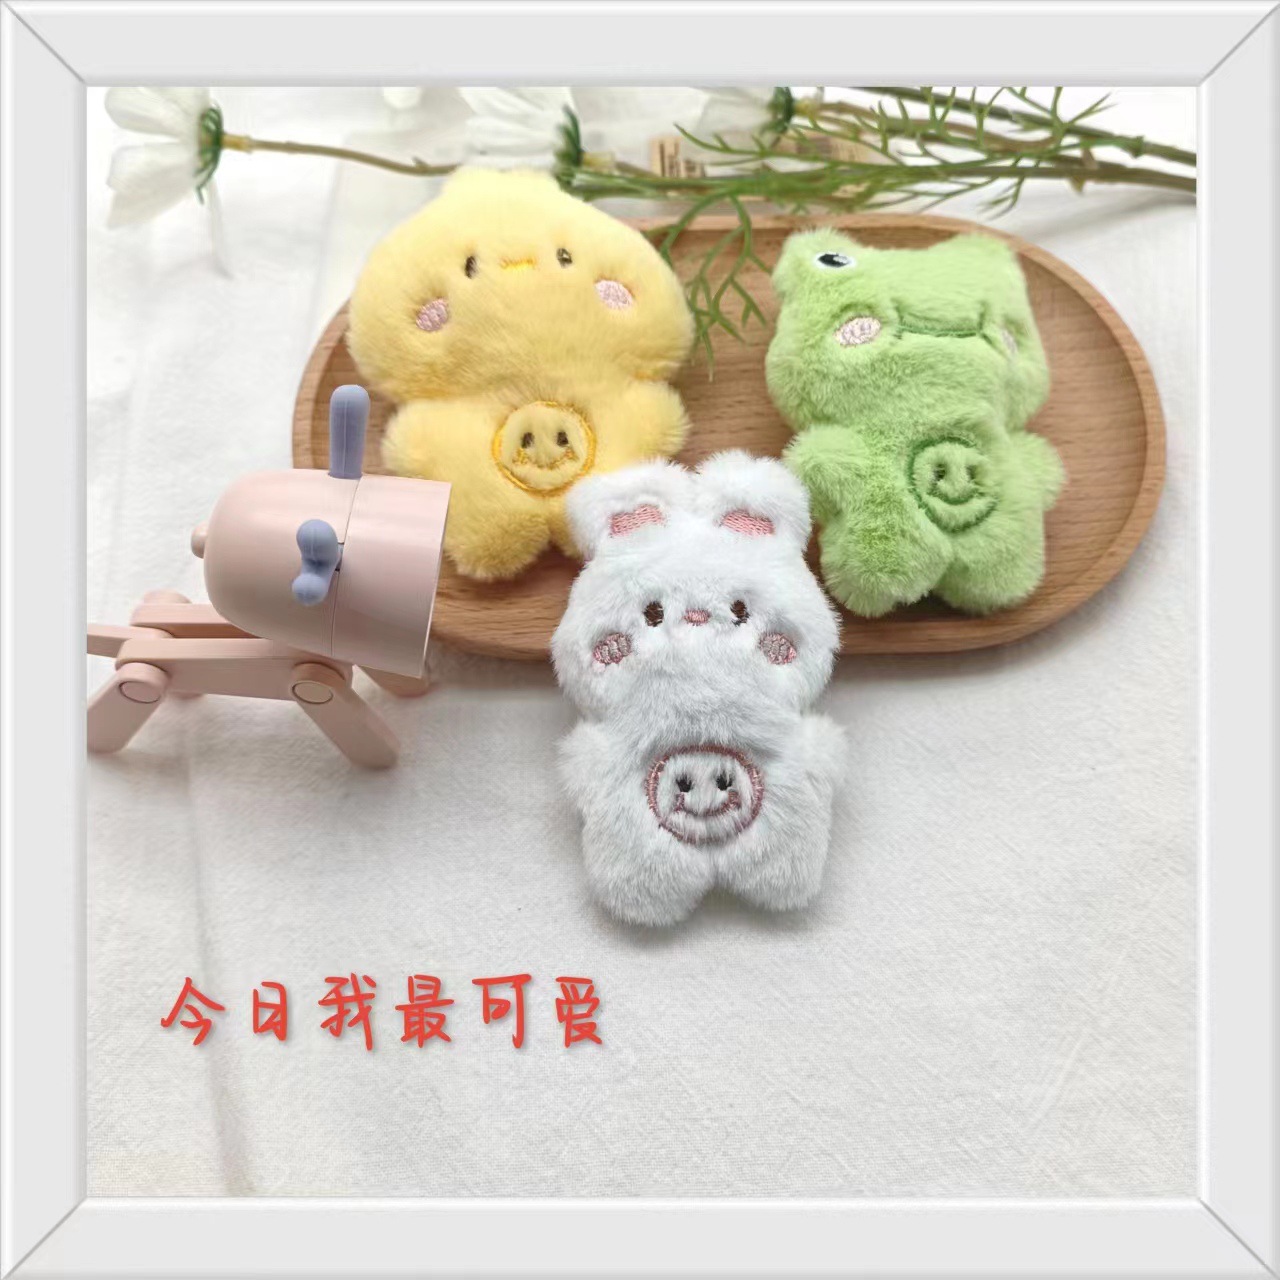 Cute Cartoon Plush Doll Brooch Children's Clothing Bag Ankle Sock Decorations Diy Phone Case Accessories